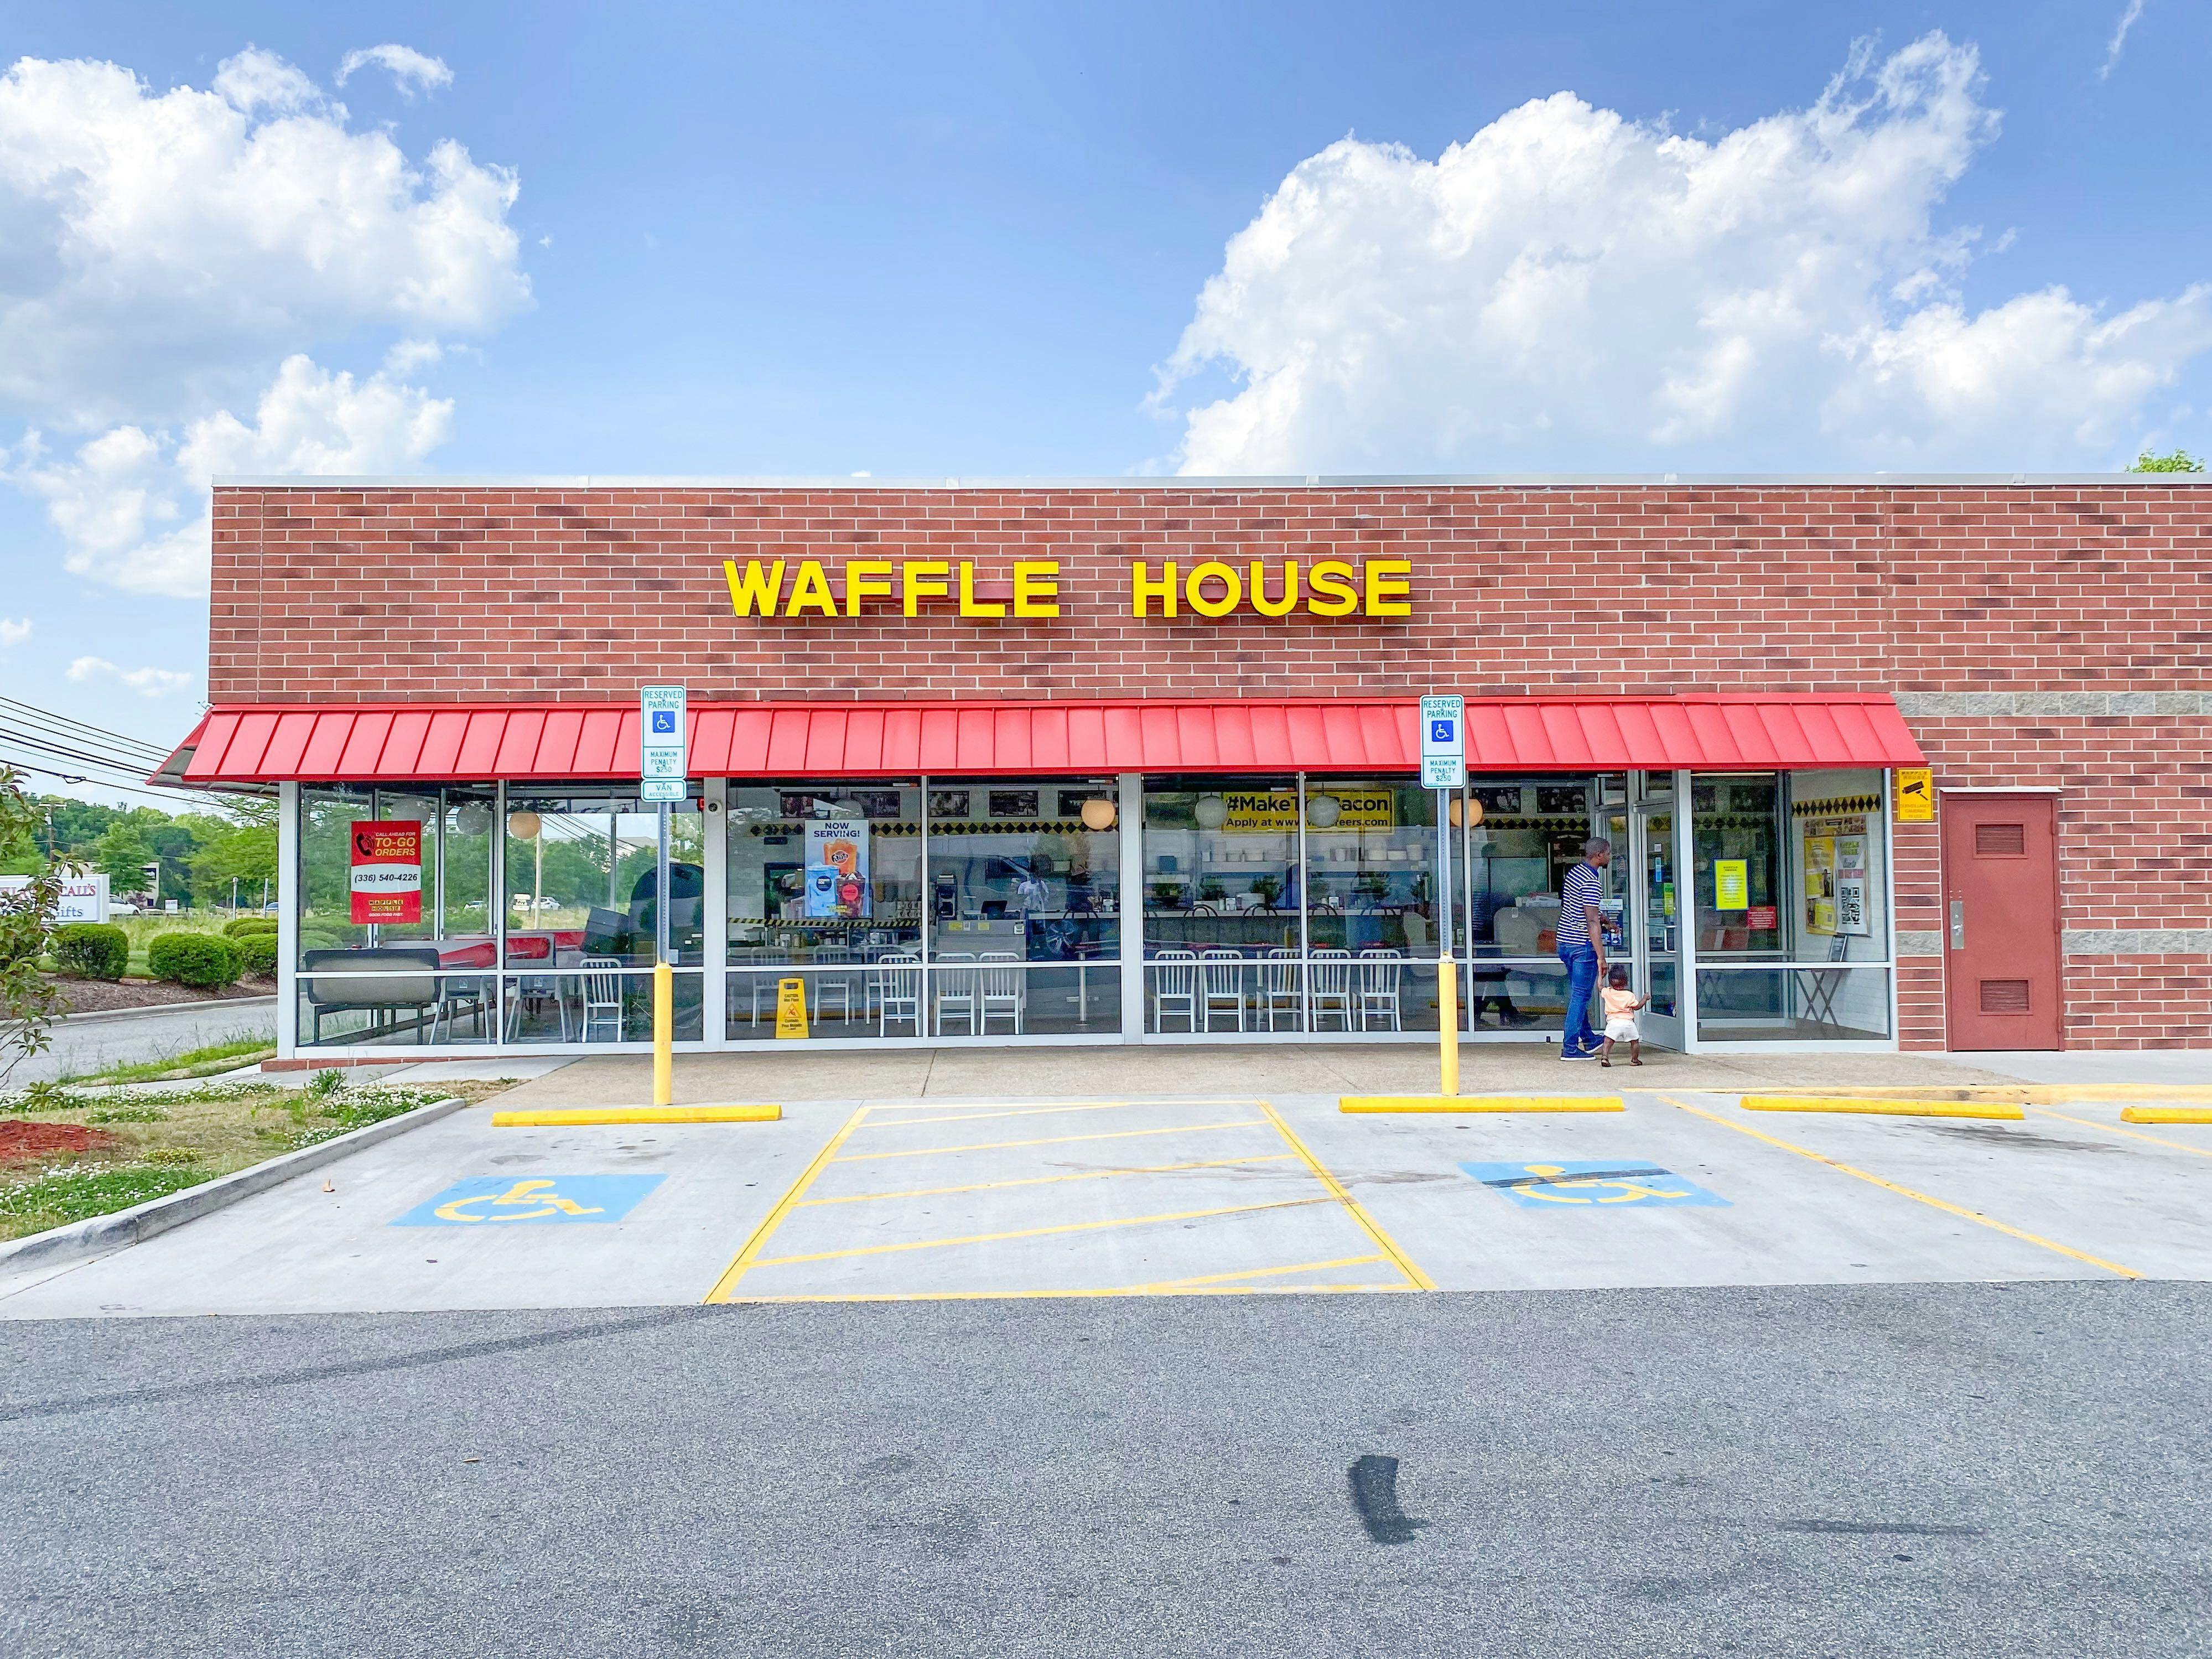 A Waffle House storefront from the parking lot.